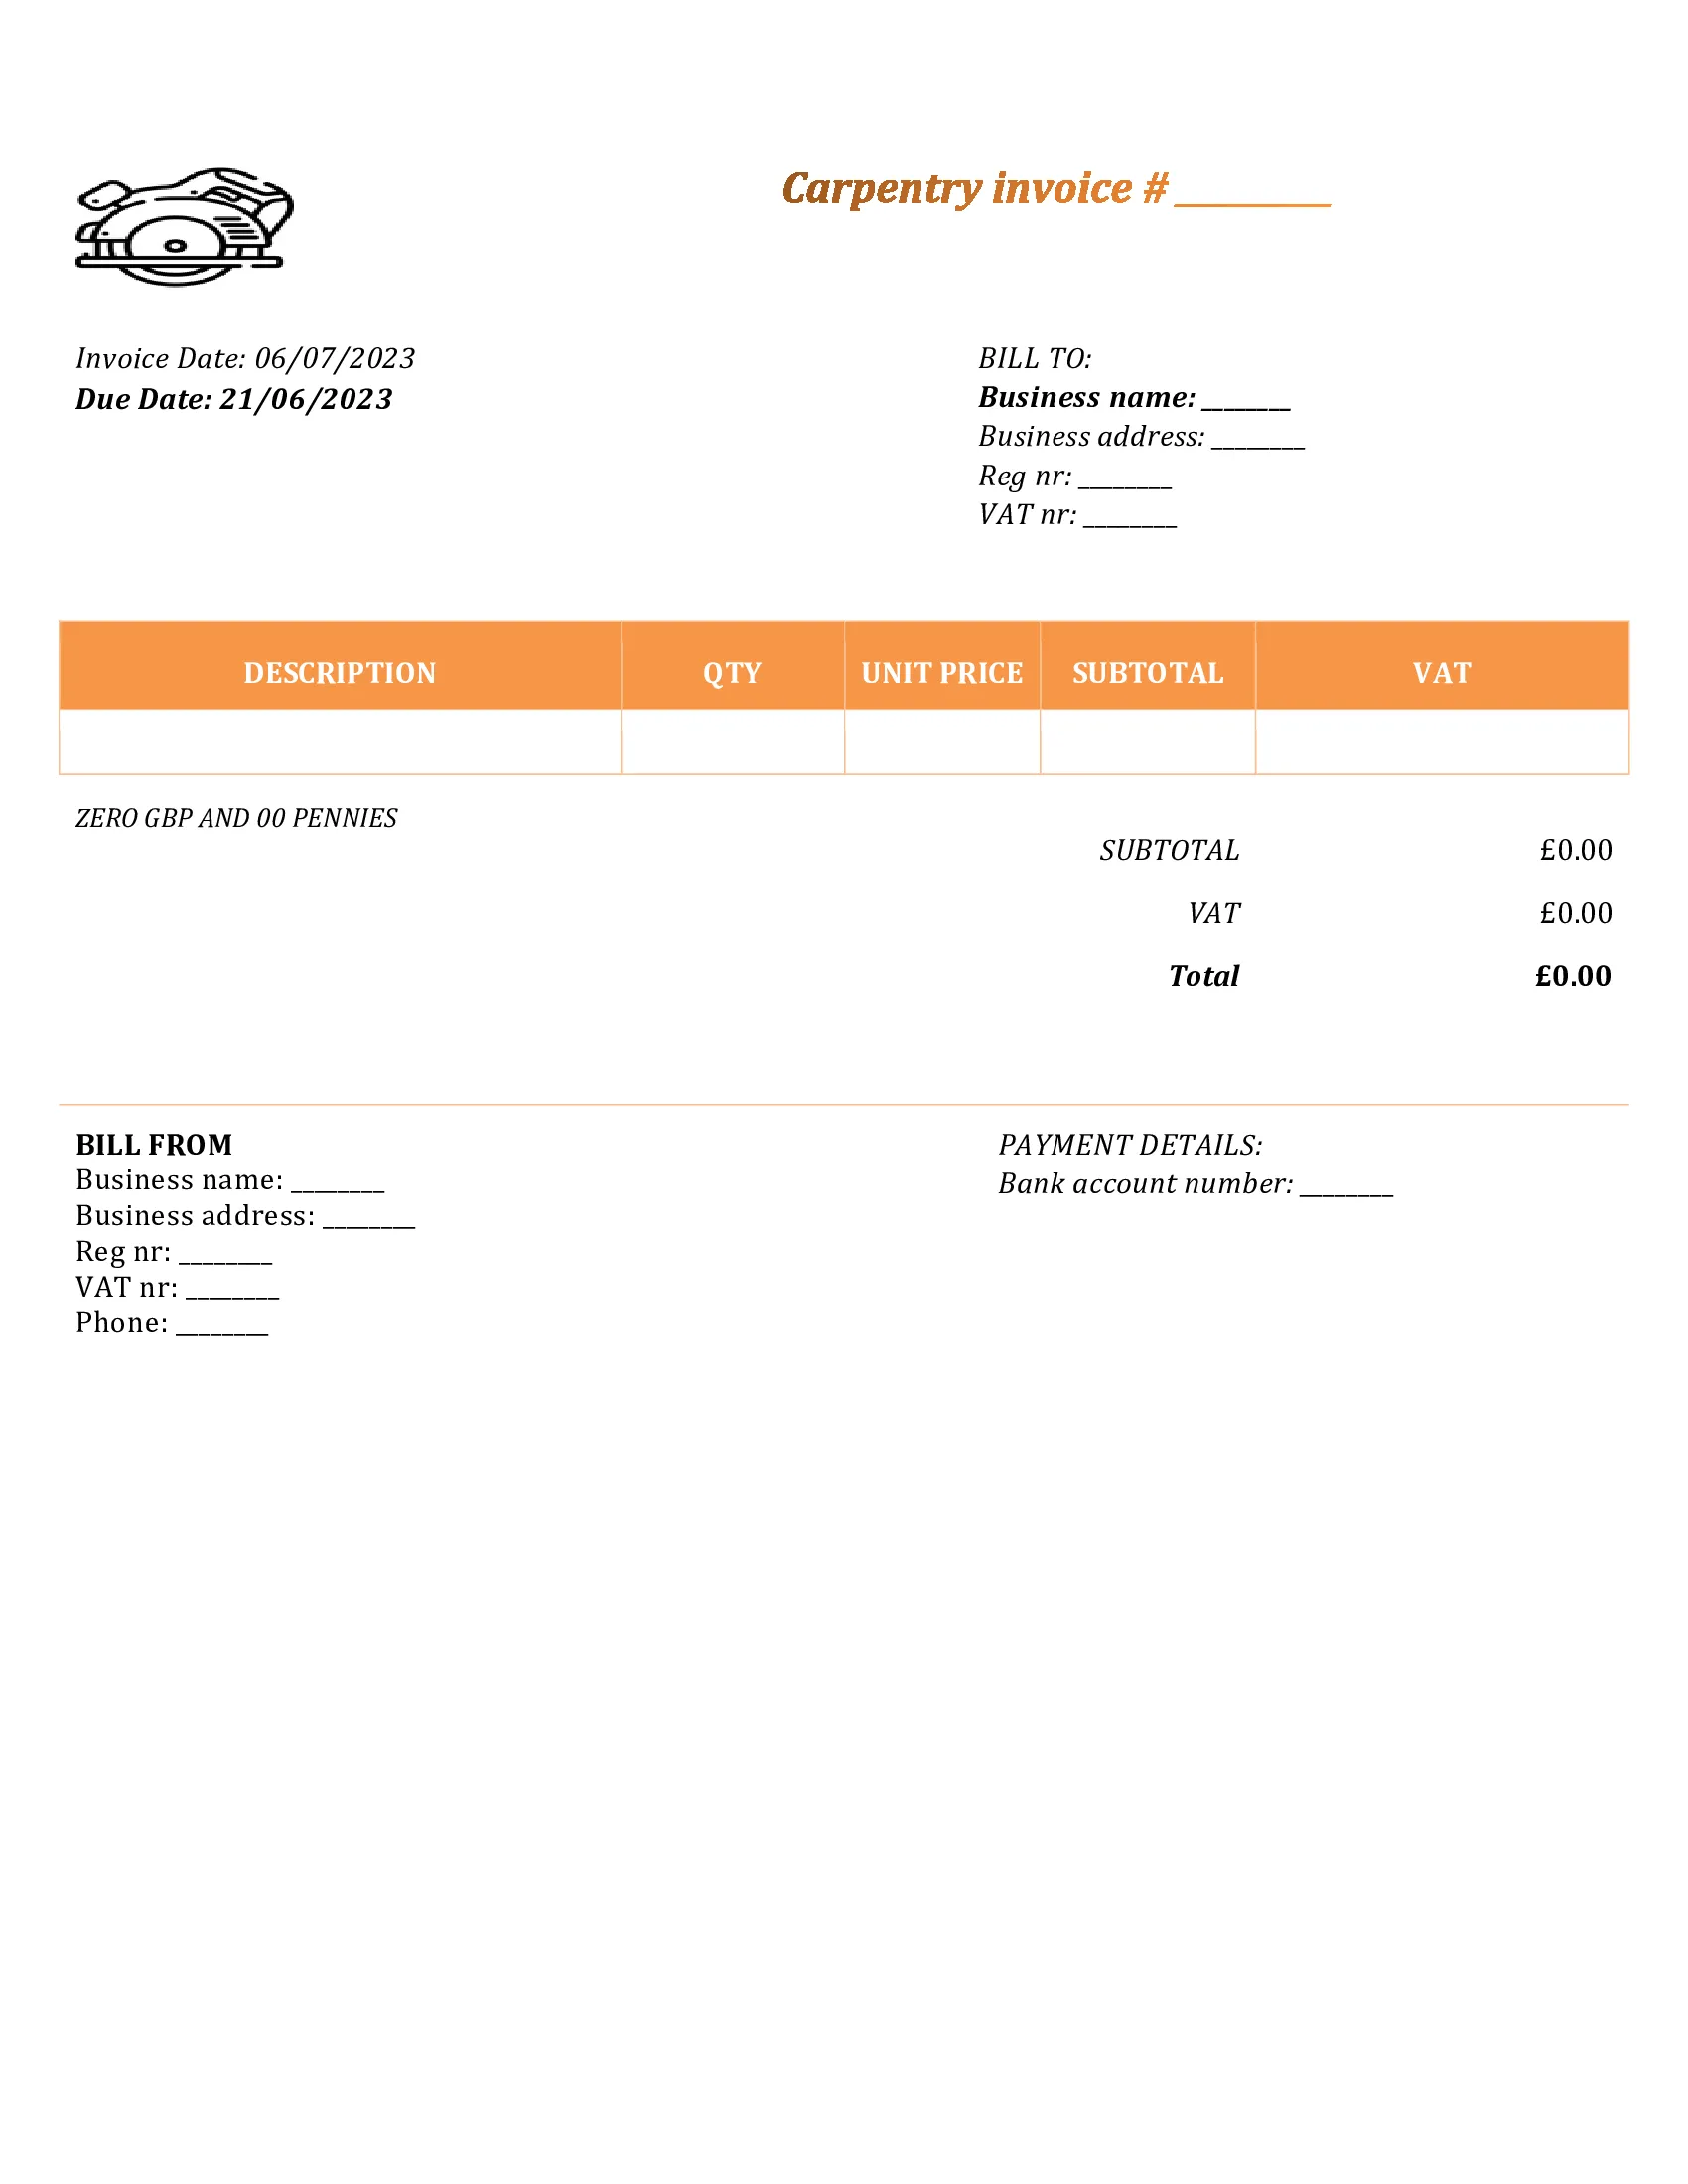 personal carpentry invoice template UK Word / Google docs